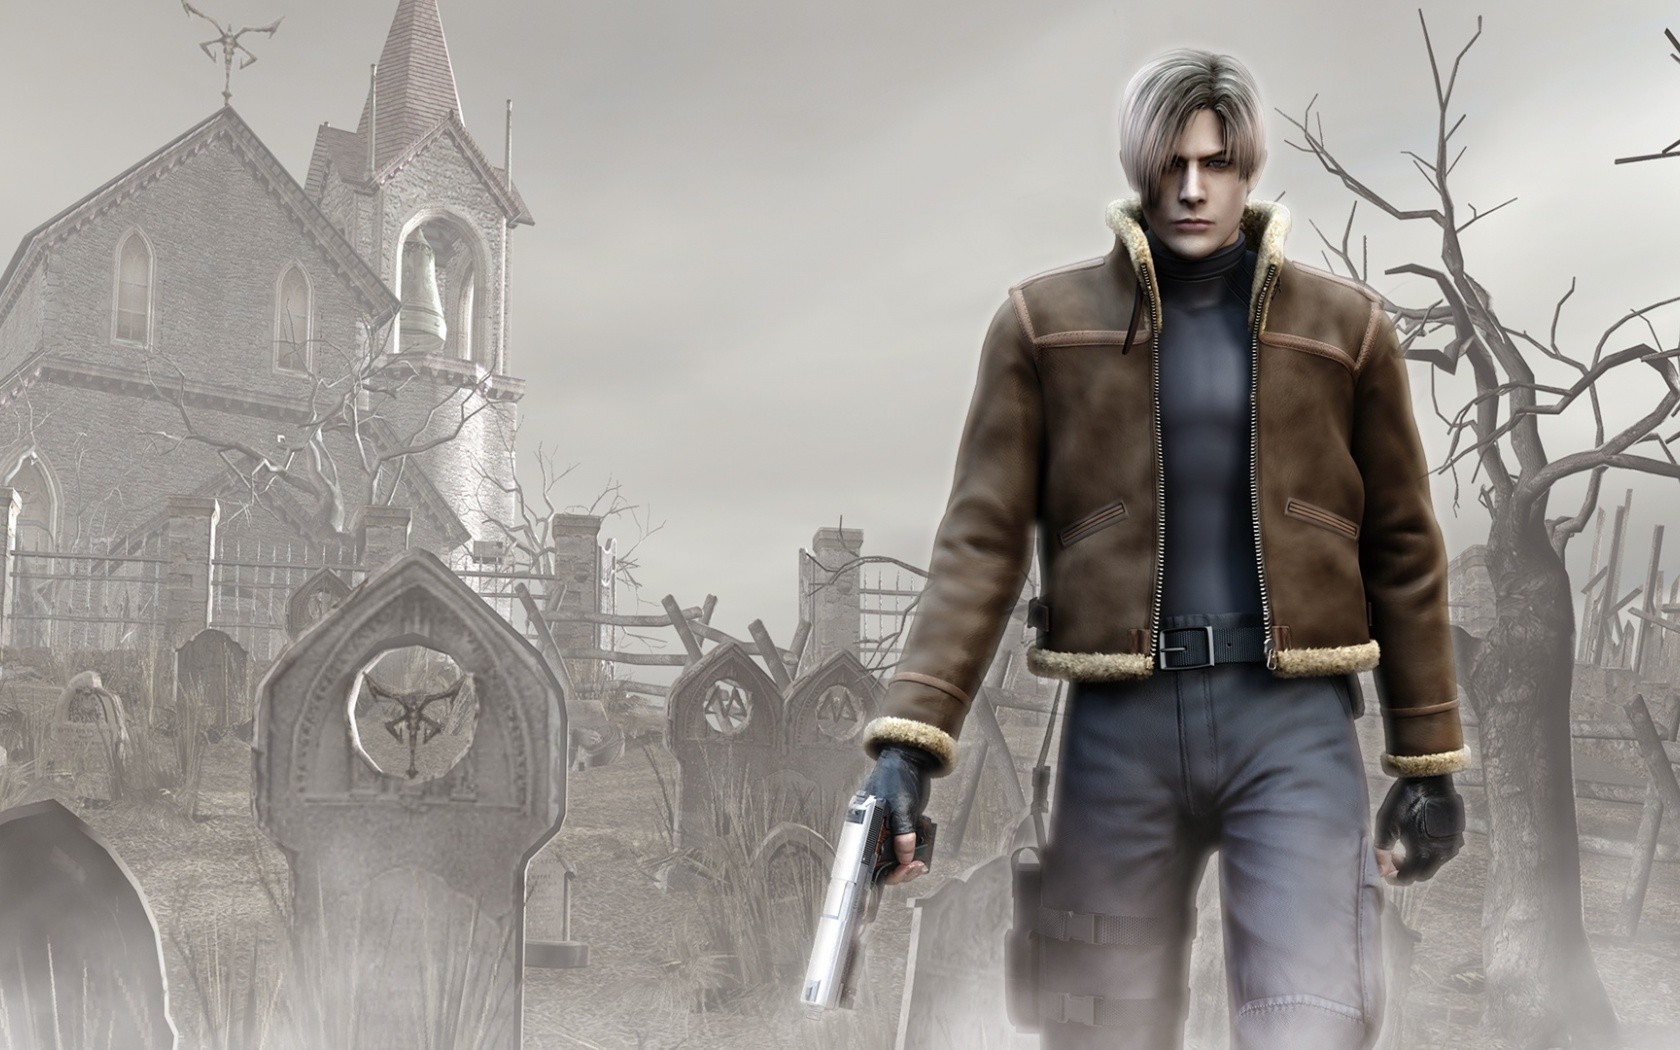 General 1680x1050 Resident Evil Resident Evil 4 video games Leon Kennedy Video Game Horror video game men video game characters gun weapon